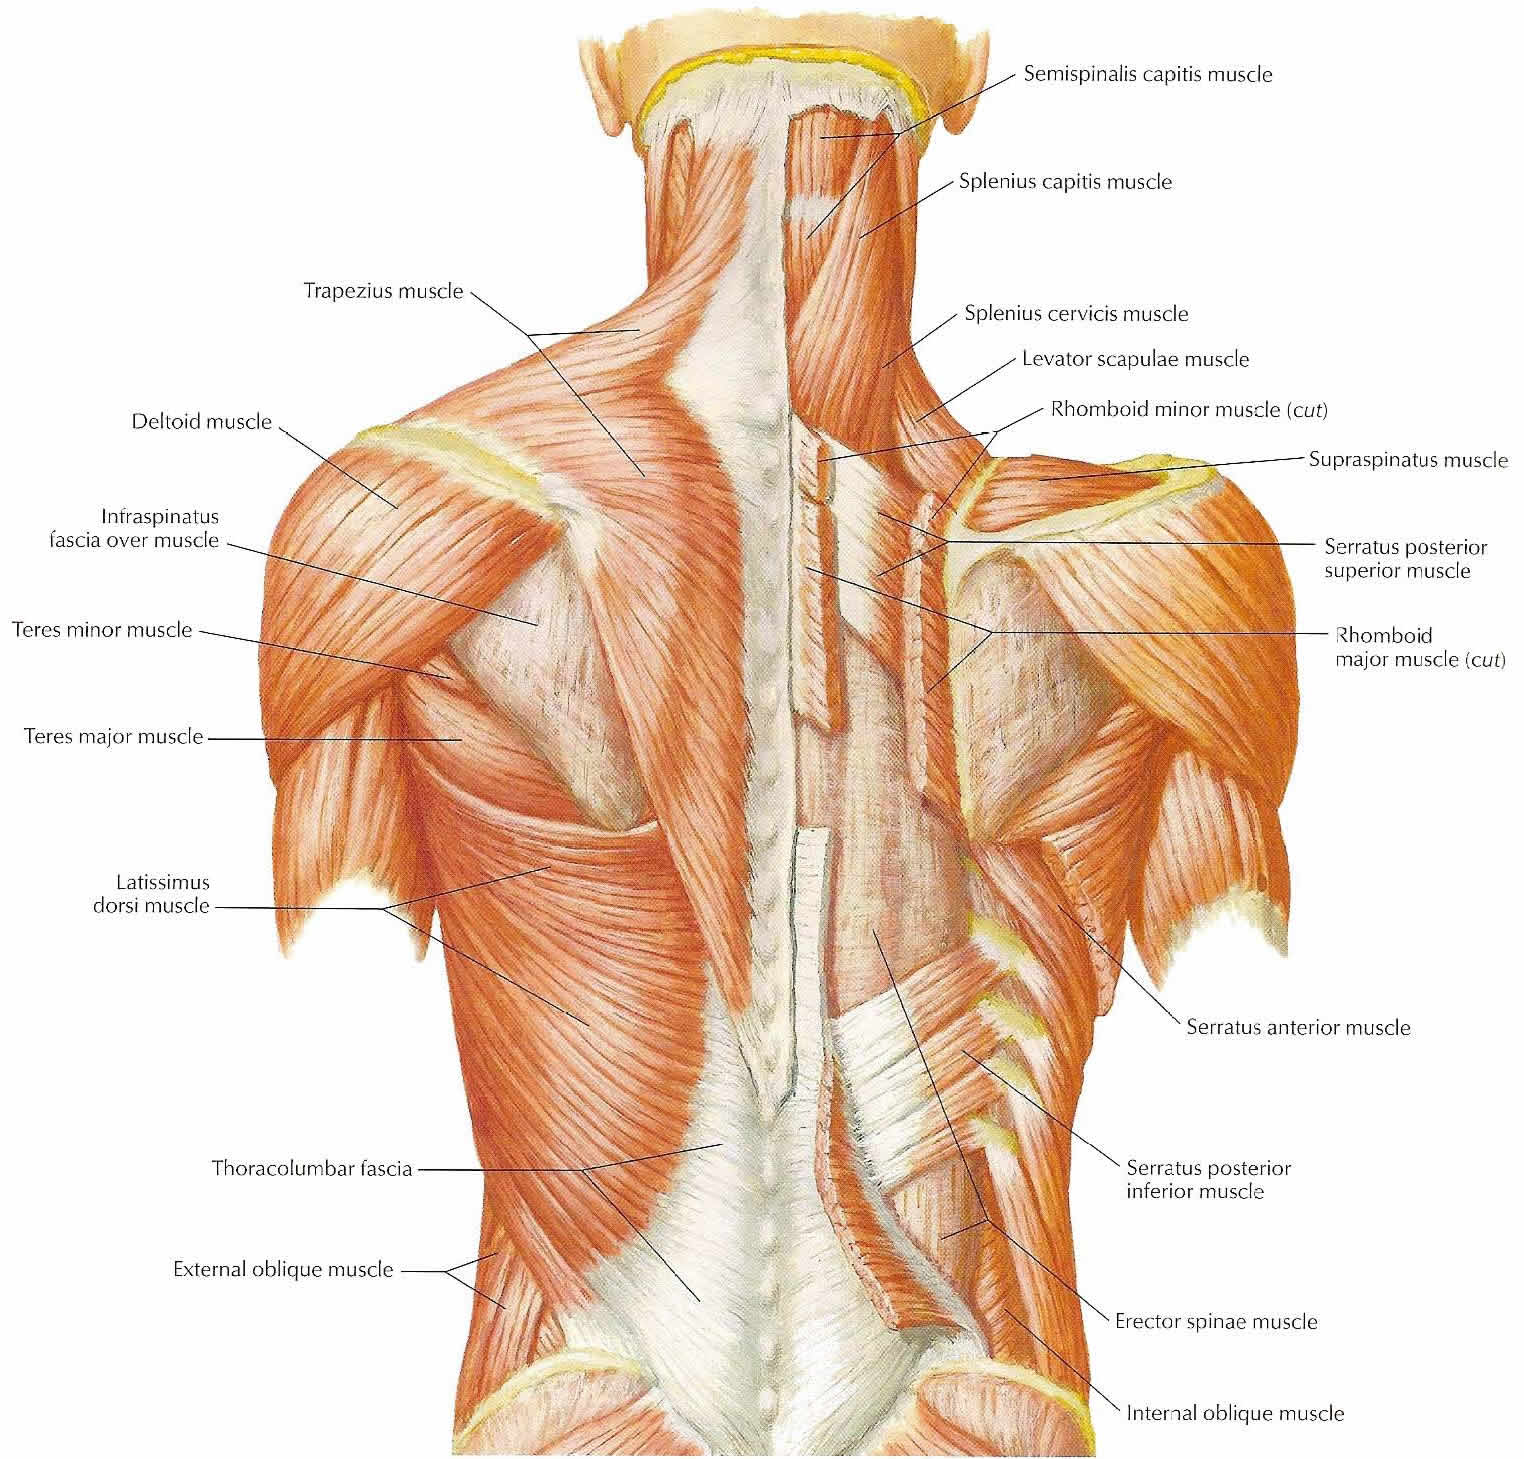 One Back Workout That Involves All Muscles of The Back